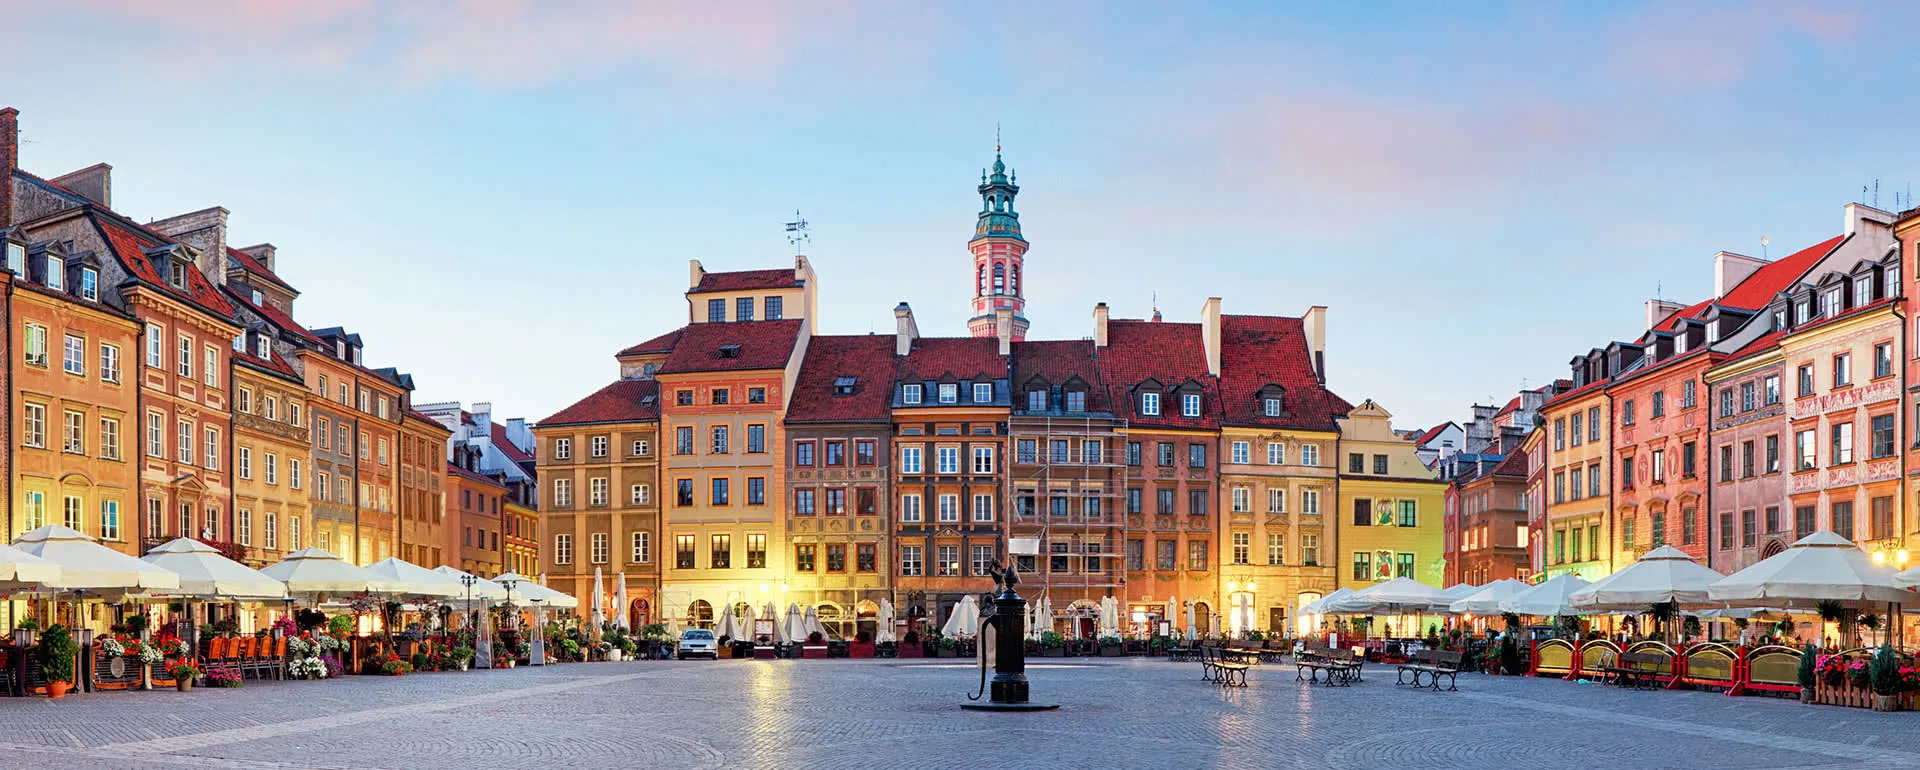 Warsaw - the destination for workers